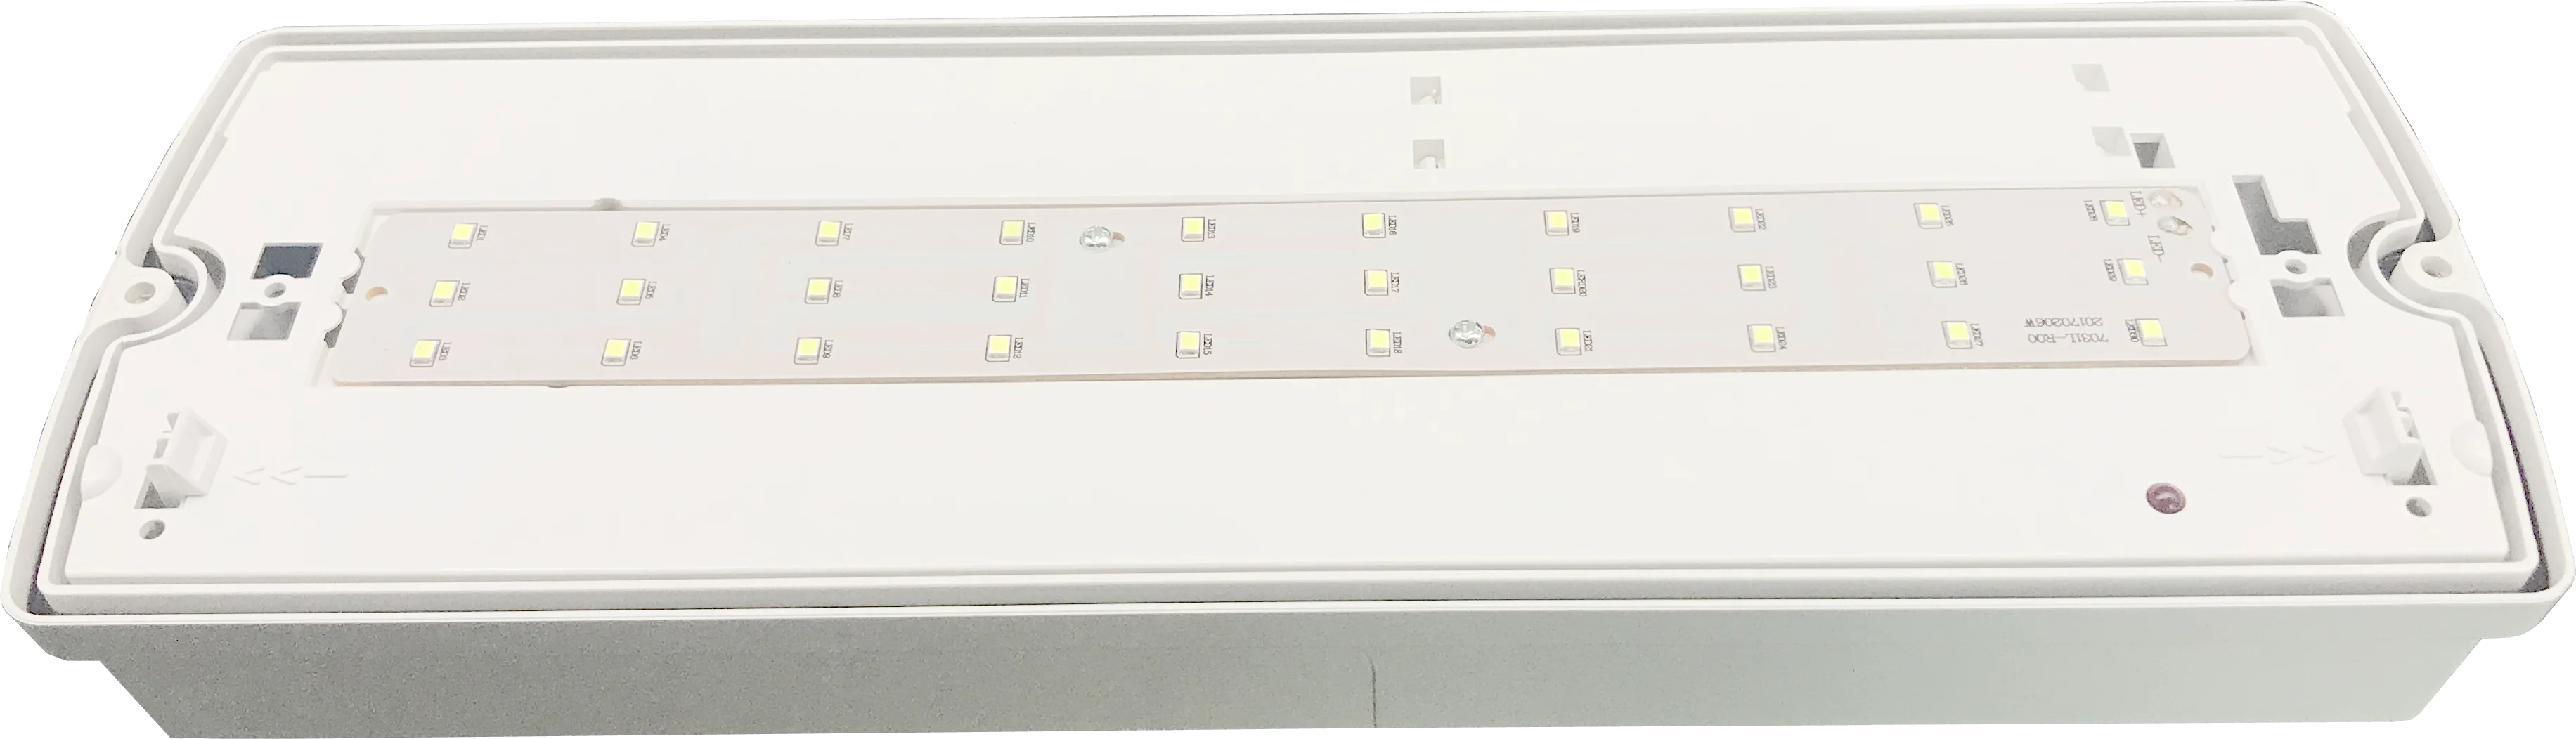 IP65 Ceiling /Wall mounting rechargeable waterproof bulkhead LED emergency light with battery backup